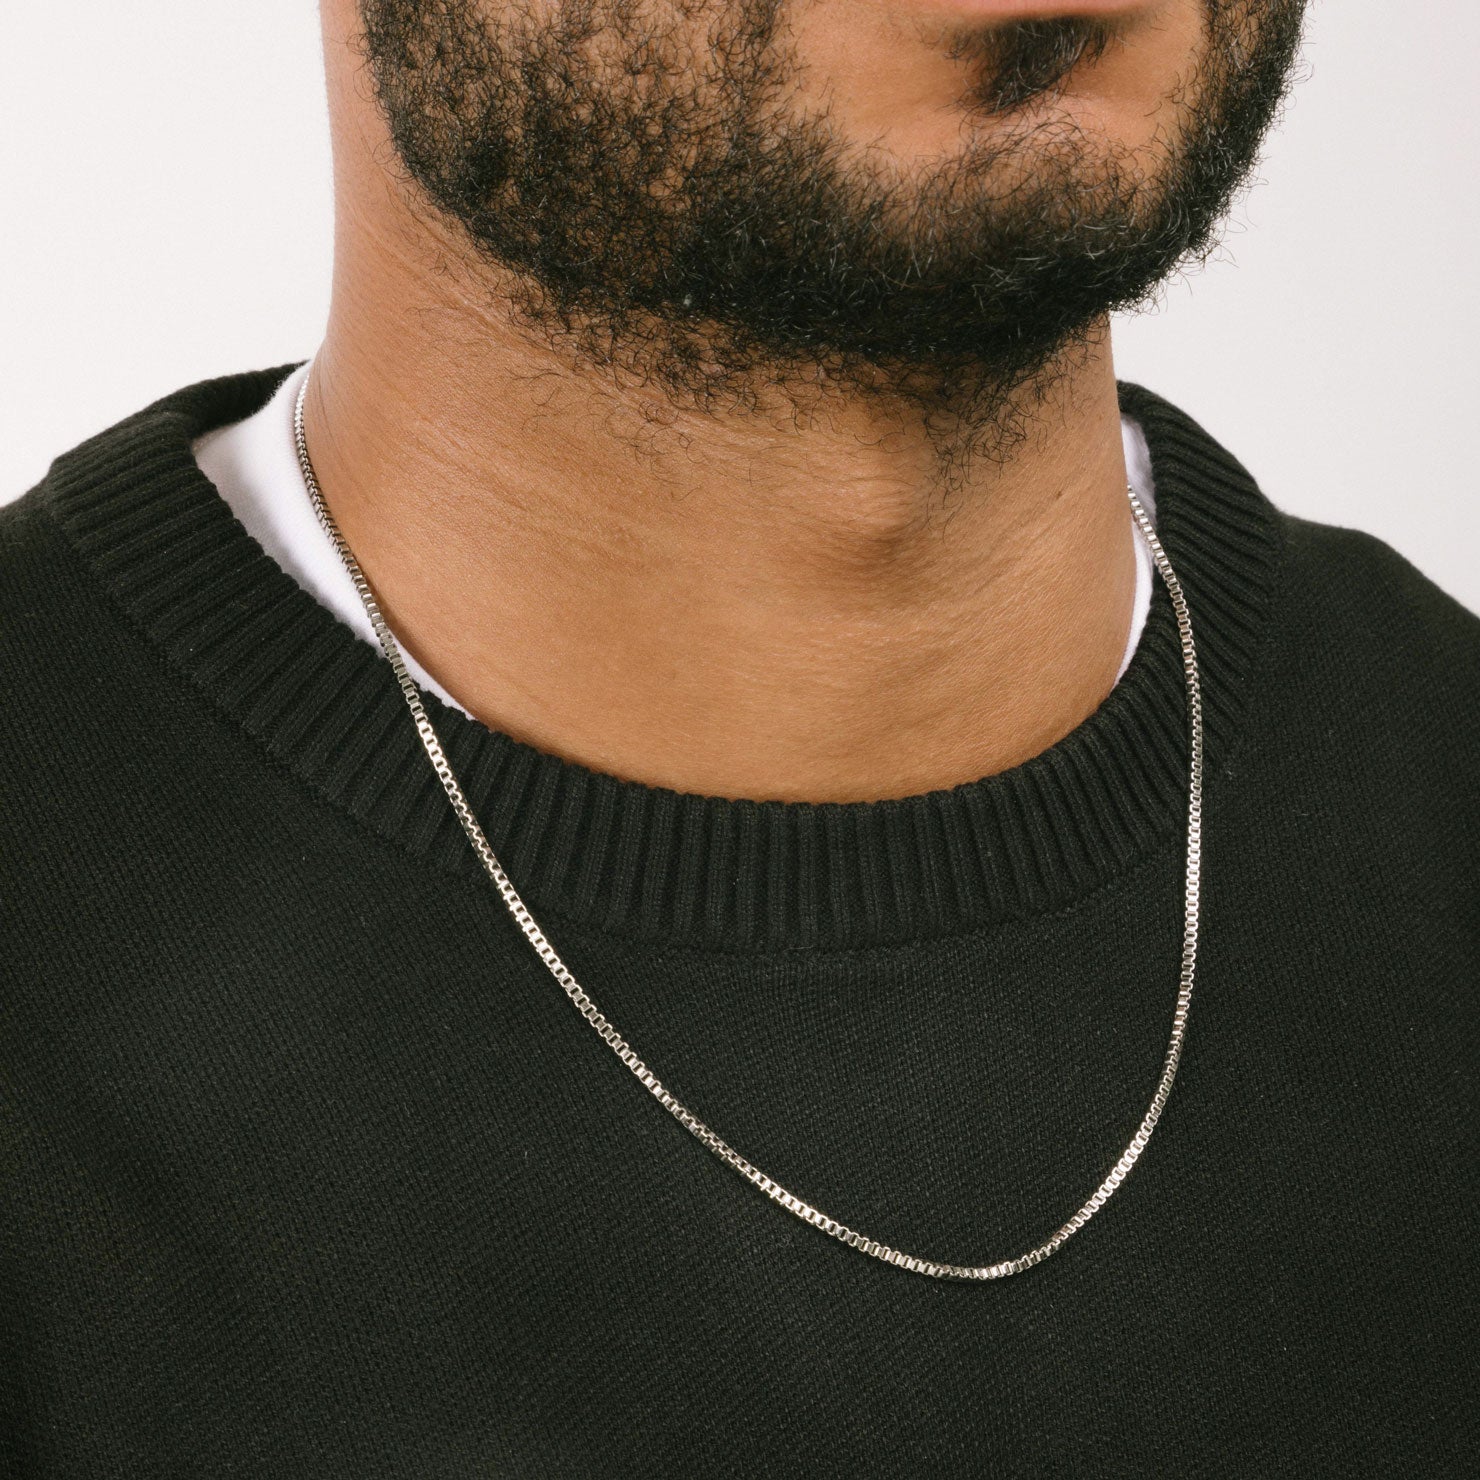 A model wearing the 2mm Square Box Chain crafted from high-grade Stainless Steel, measuring 22 inches / 56 cm in length and 2 mm in width. Weighing 5.8 grams, this chain is non-tarnishing and water-resistant.